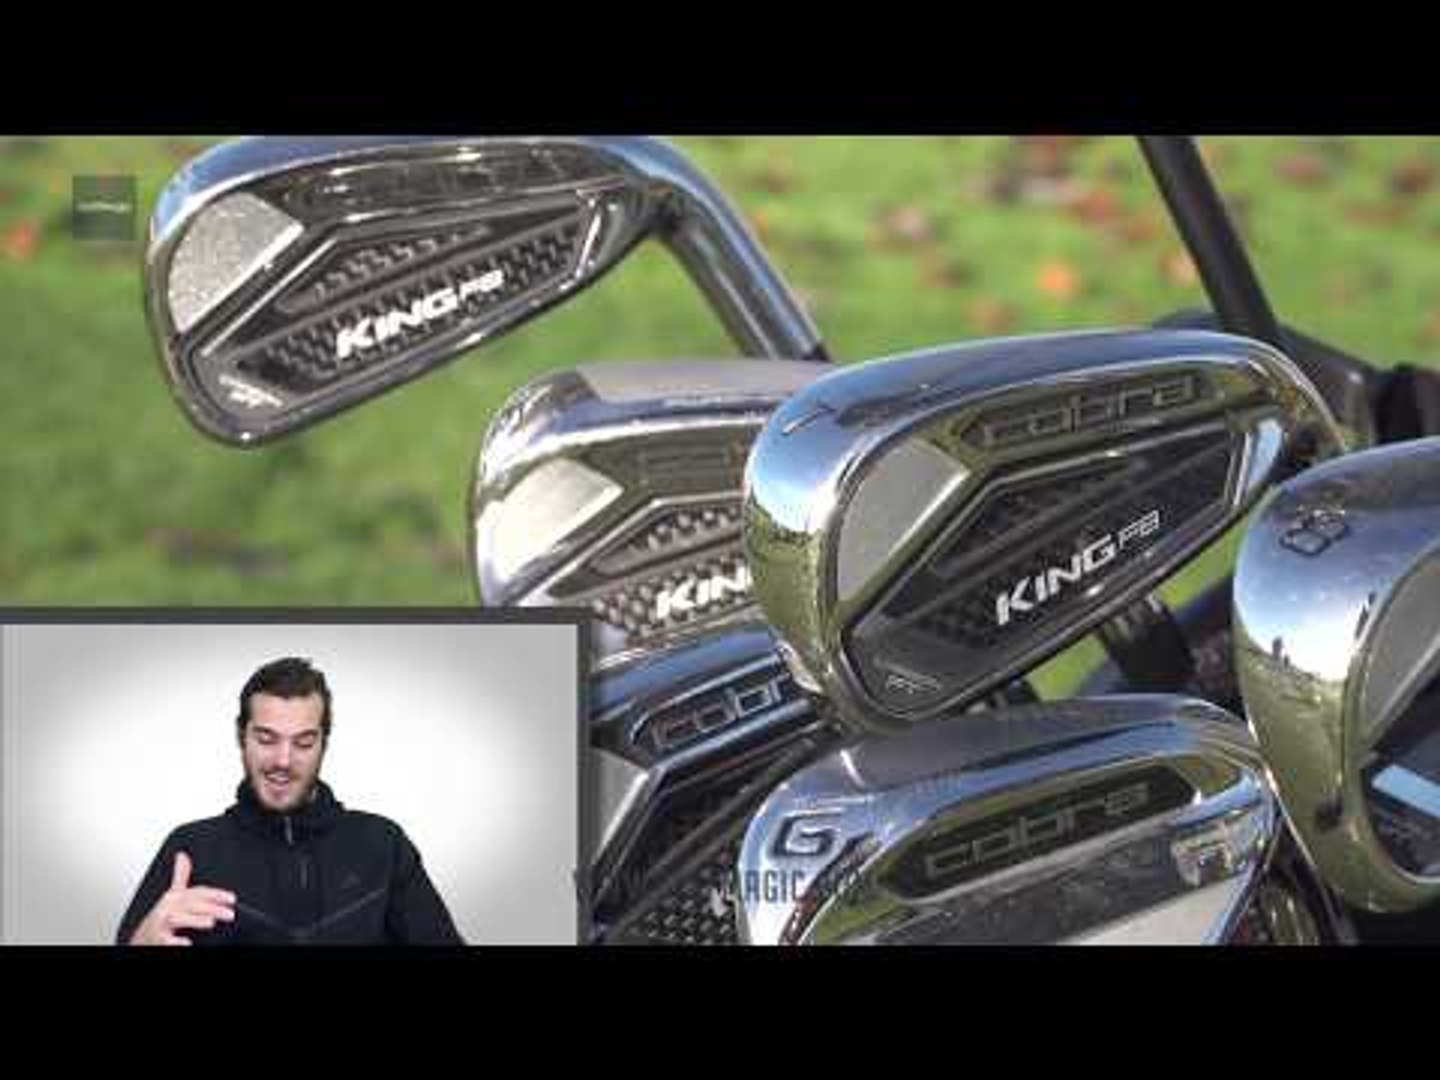 Cobra KING F8 iron review: best value for money premium golf iron - video  Dailymotion